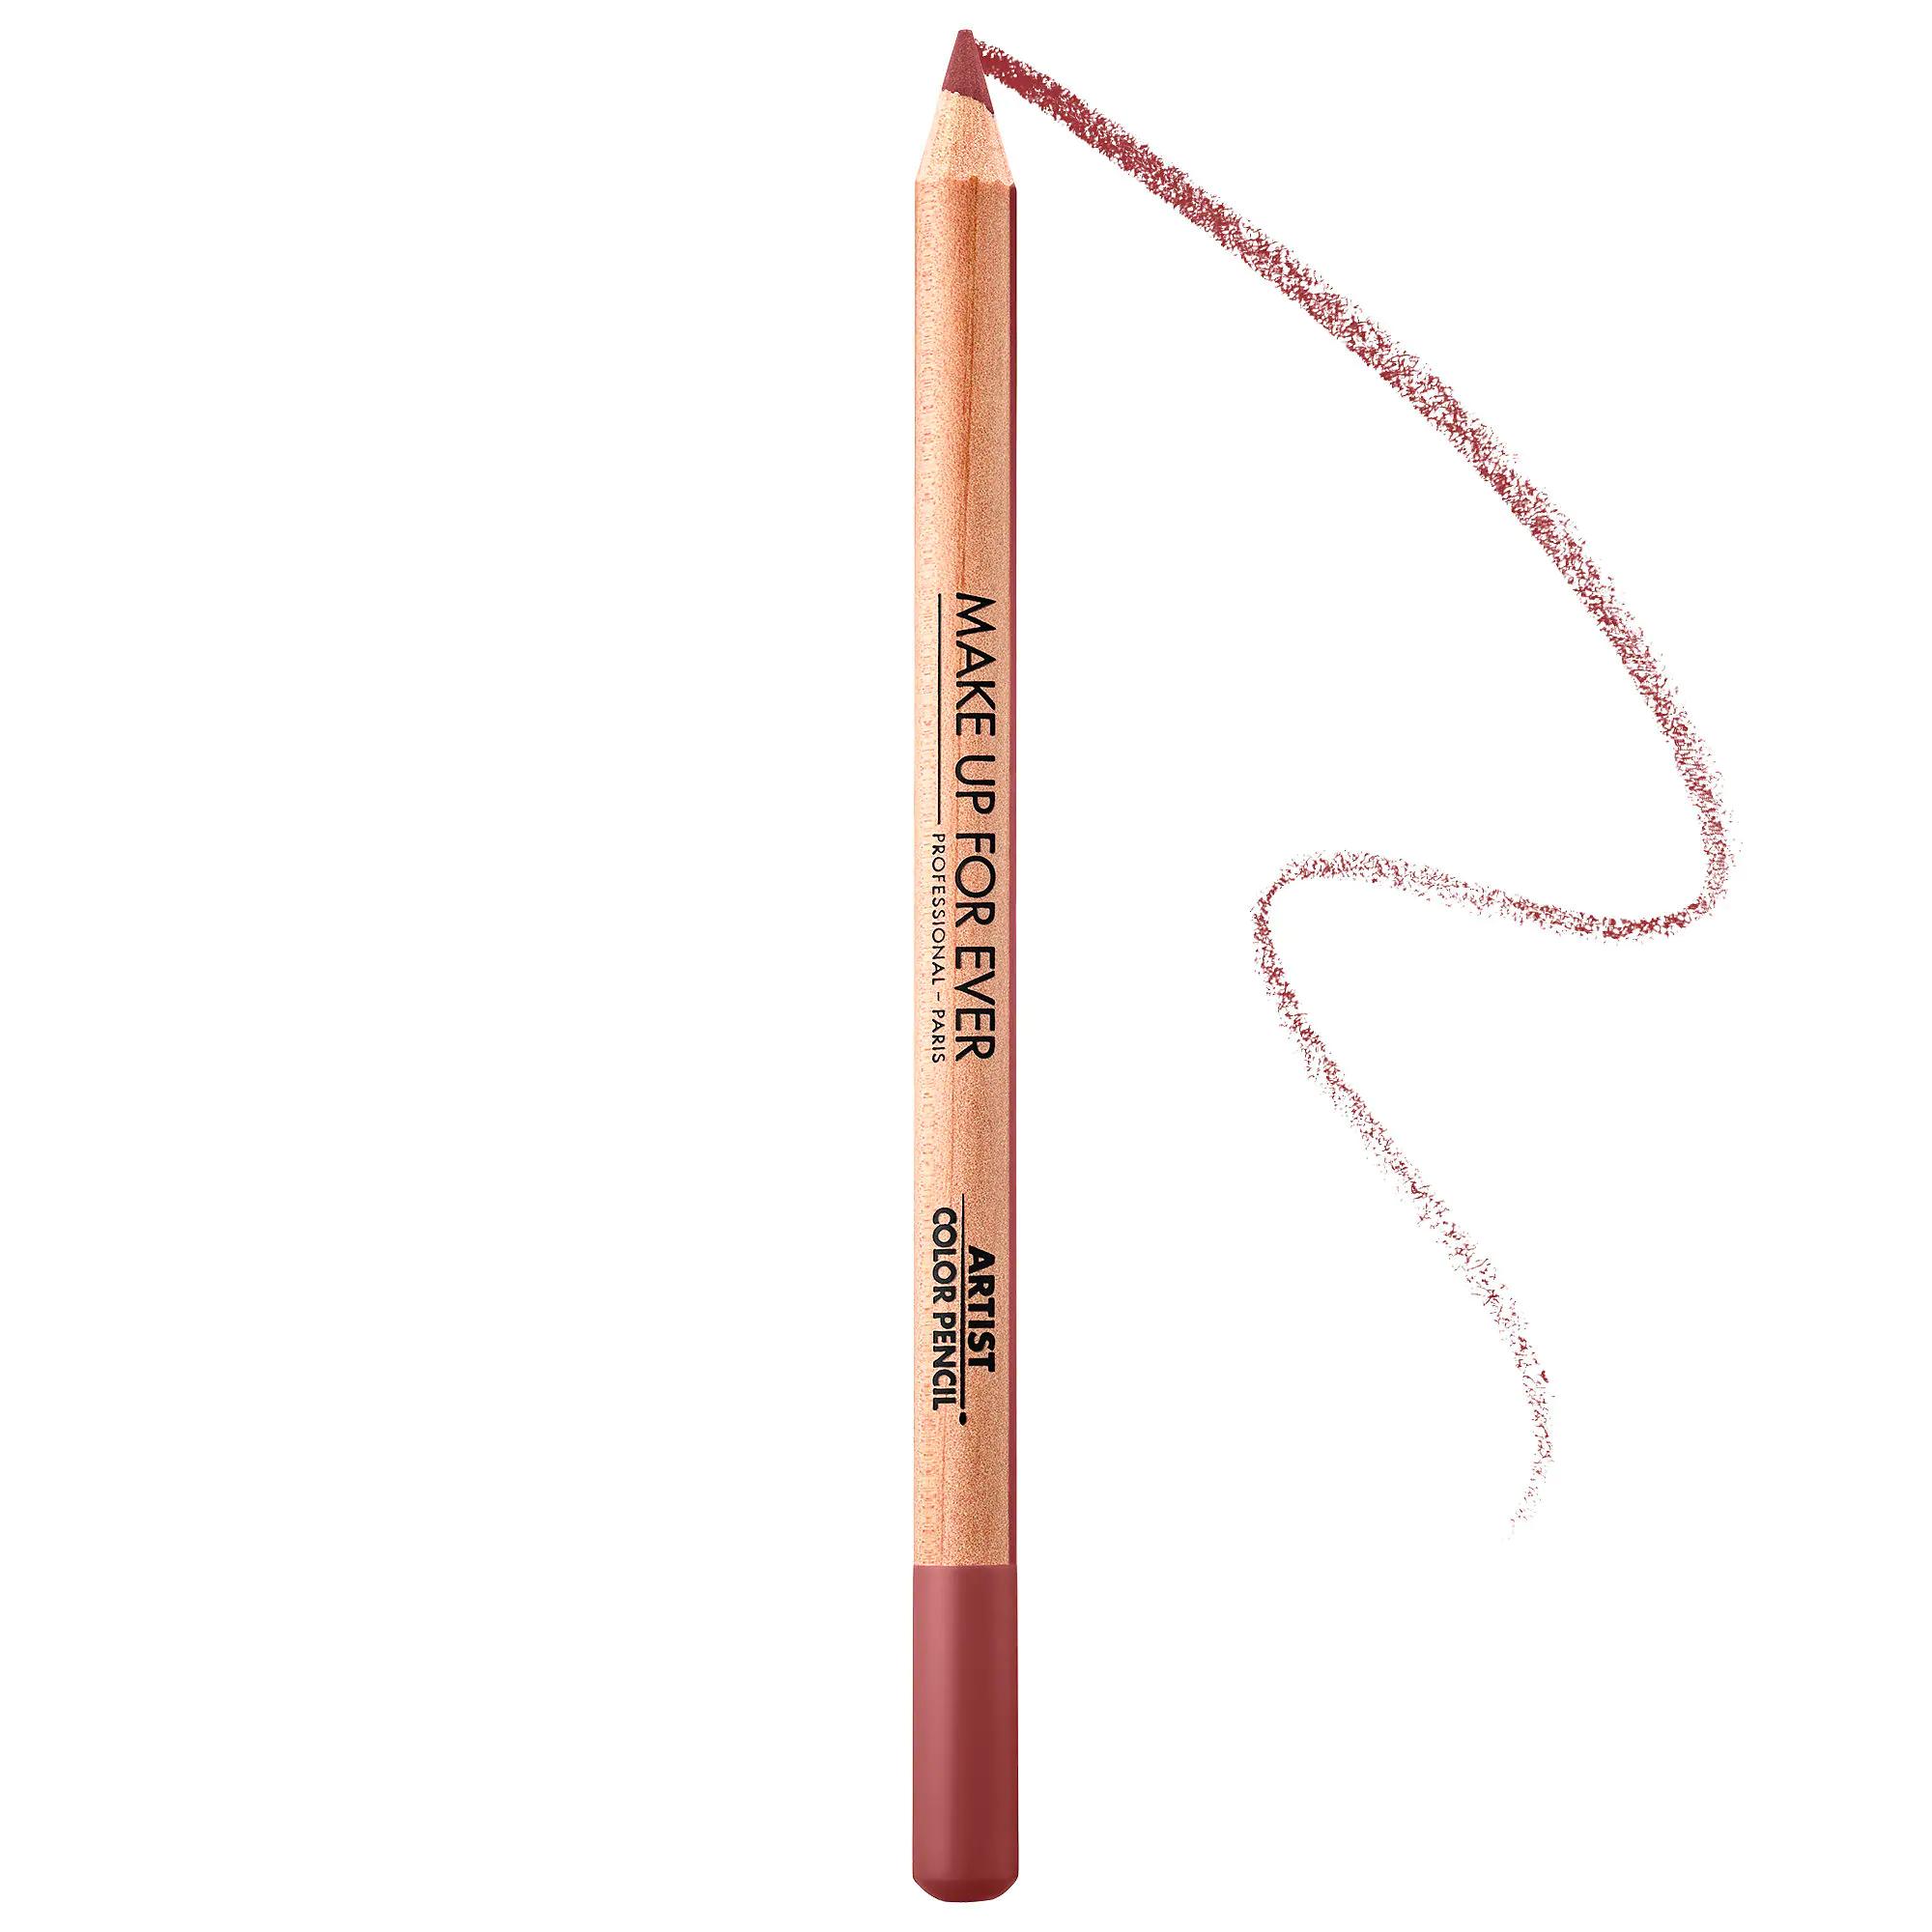 Makeup Forever Artist Color Pencil Full Scale Rust 706